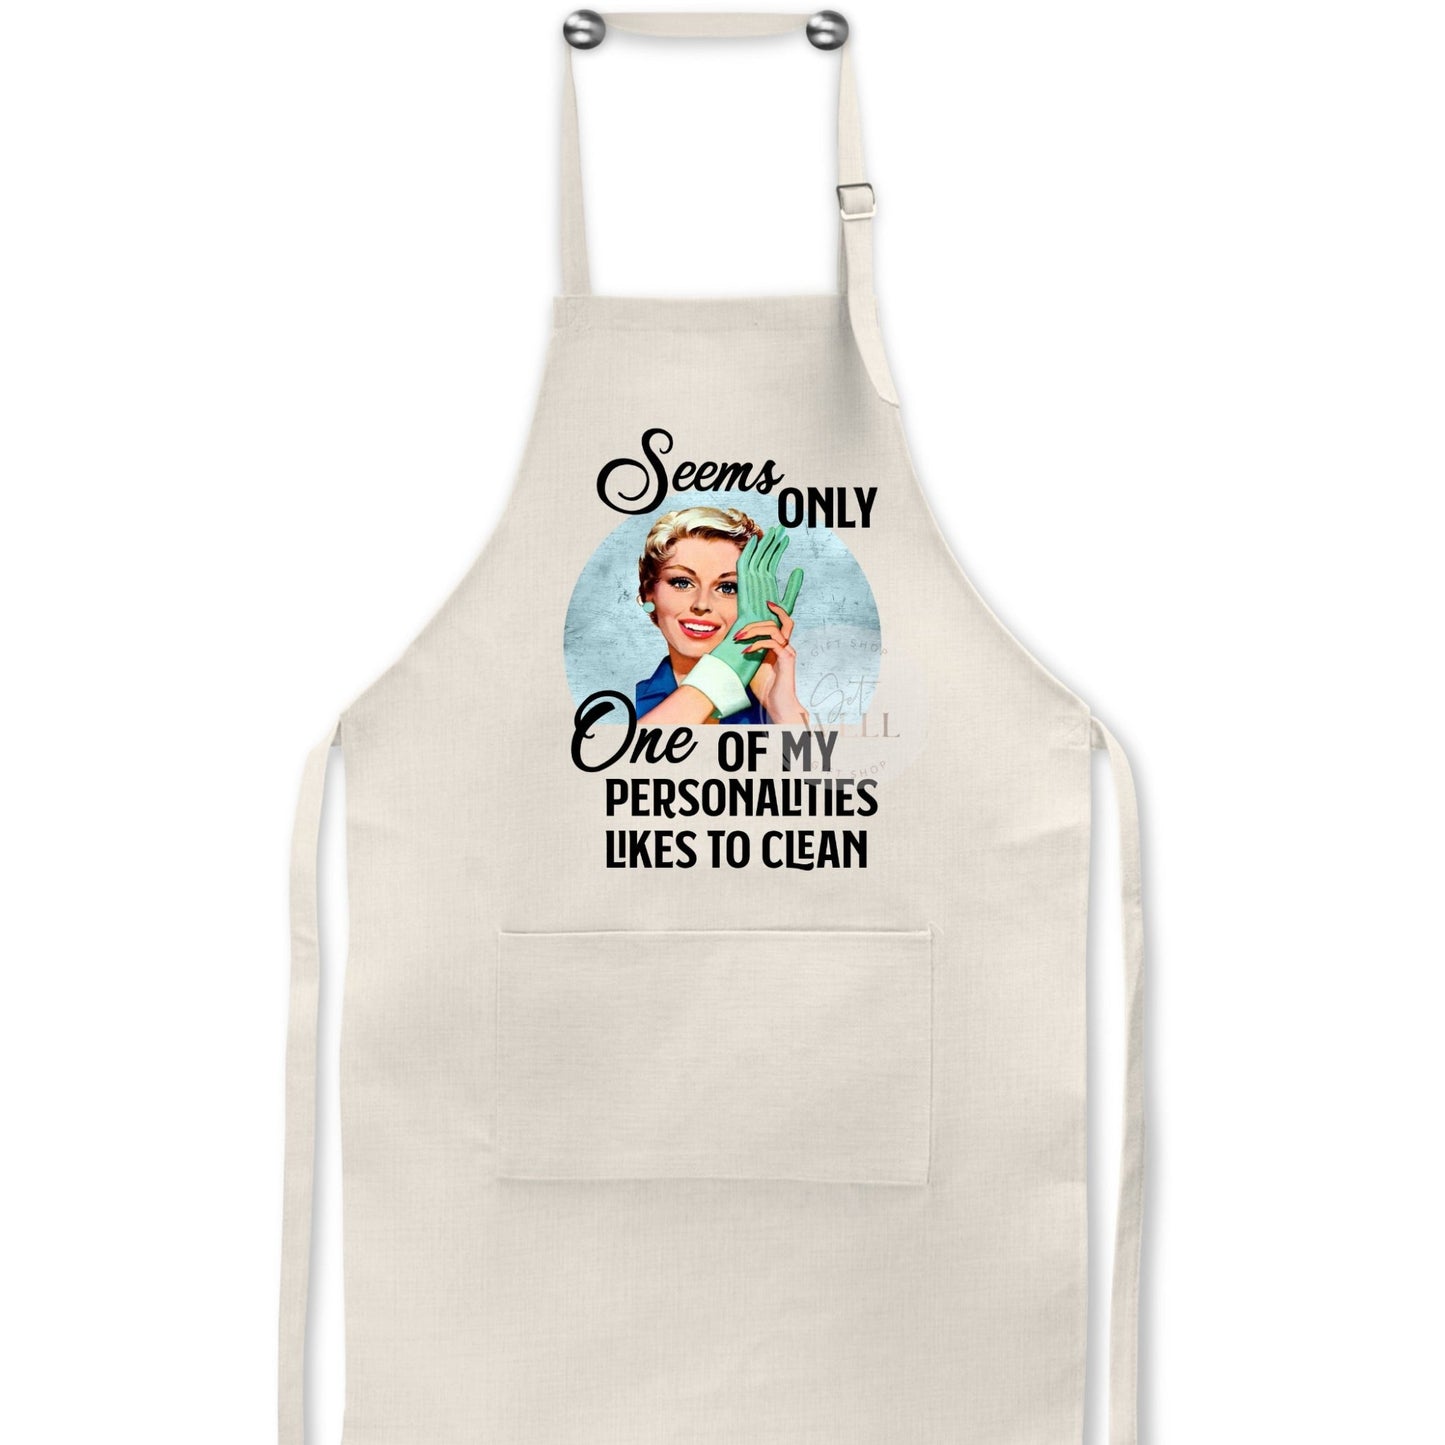 Seems Only One Of My Personalities Likes To Clean - Retro Housewife Linen Apron - Jammin Threads